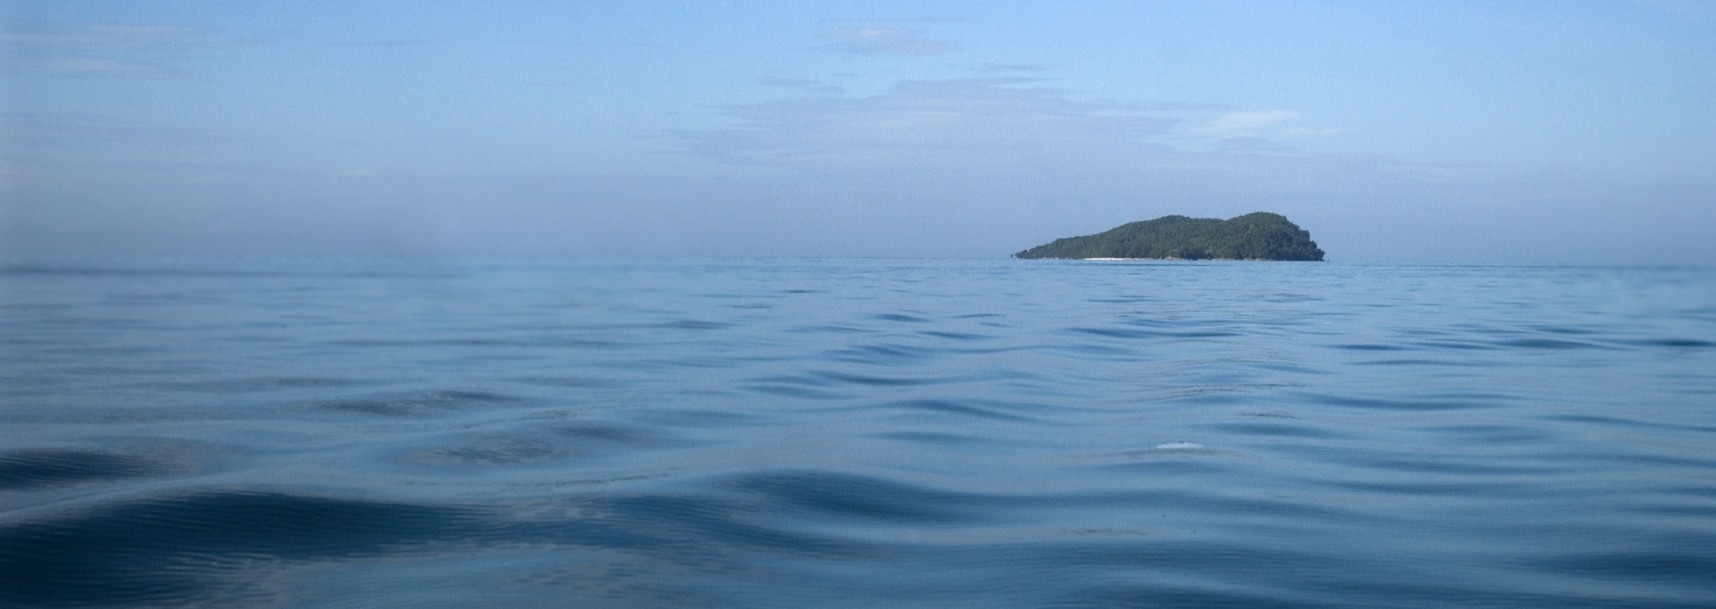 Header Image of a Rock Island surrounded by water